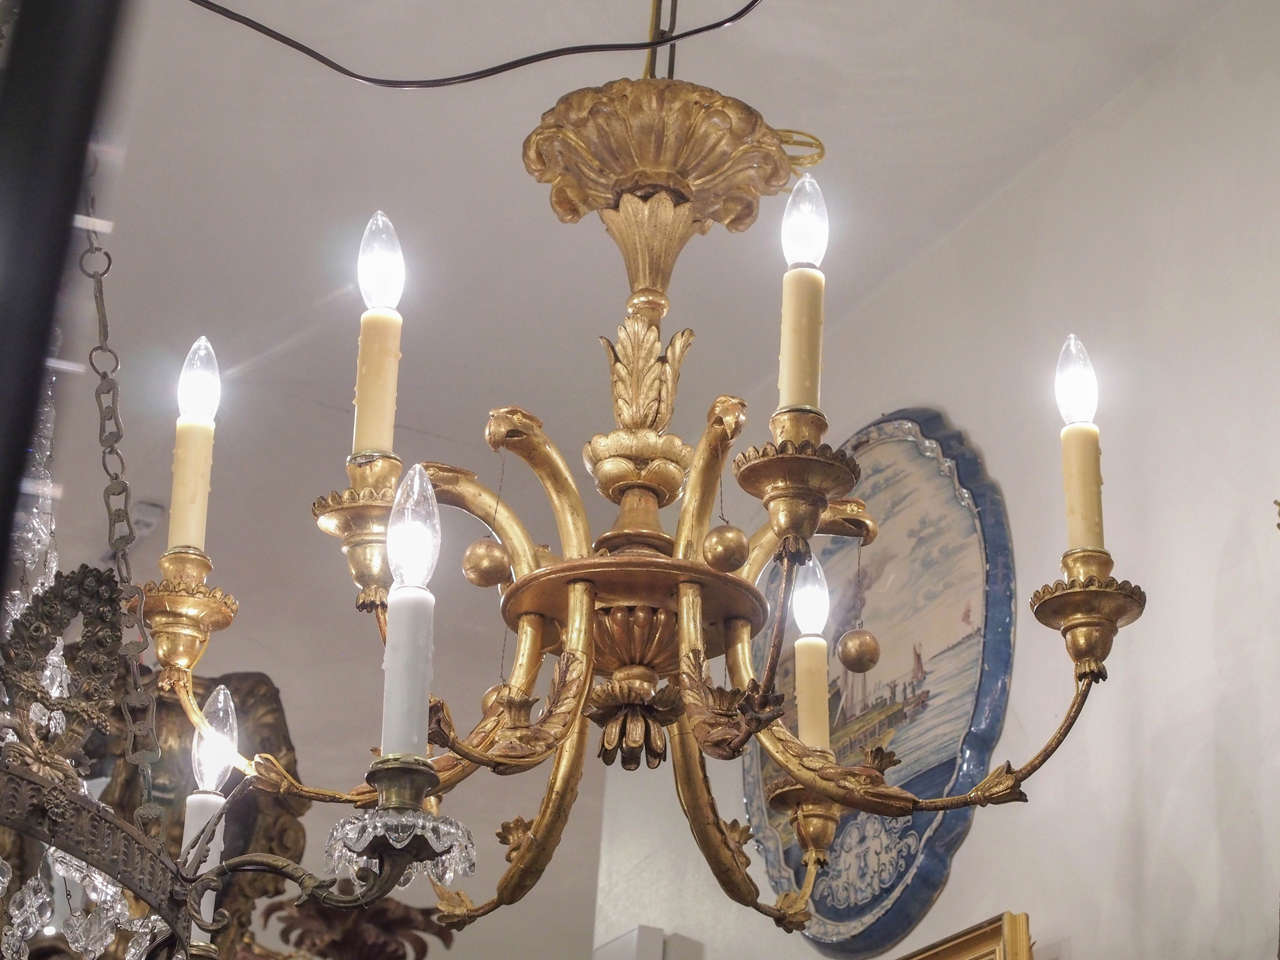 19th century German giltwood chandelier with six lights. Wood carving on iron armature. Unusual eagle head motif holding balls on chains. This fixture has been re wired to US current. Each arm is rated 60 W. It comes with chain and canopy and ready